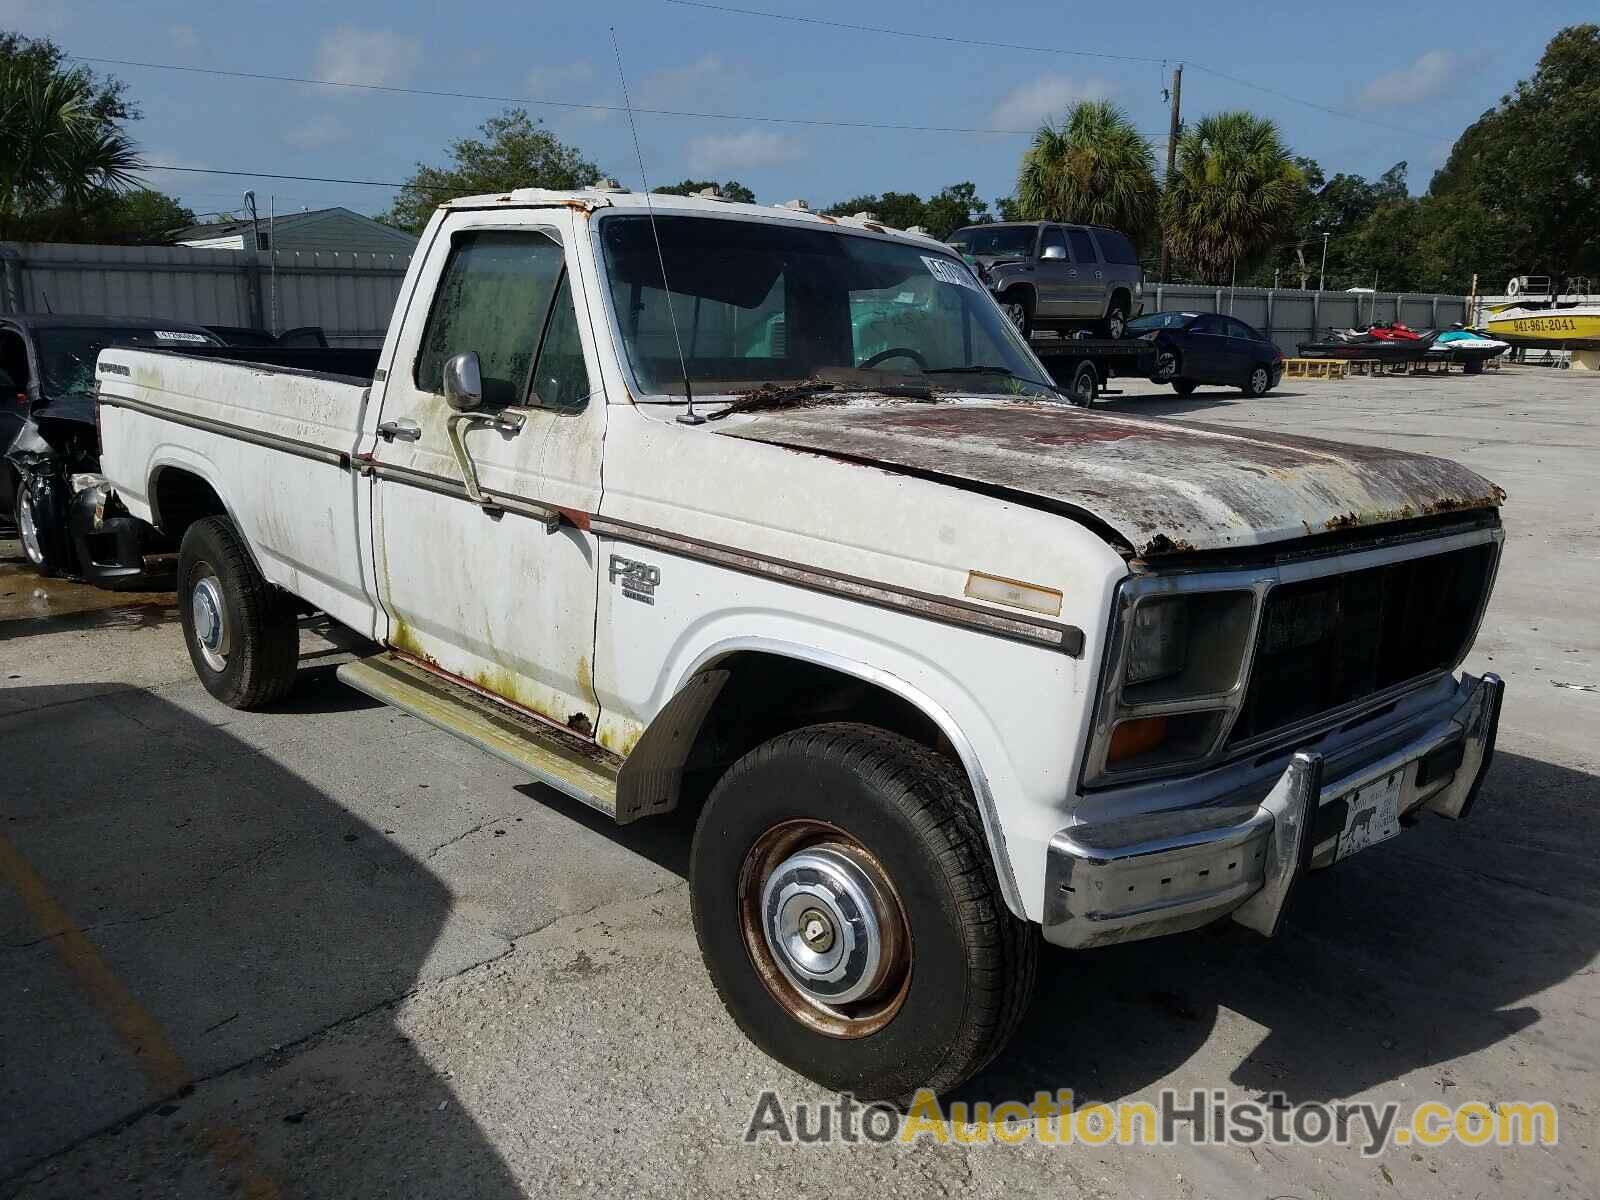 1985 FORD F250, 1FTHF261XFNA49019